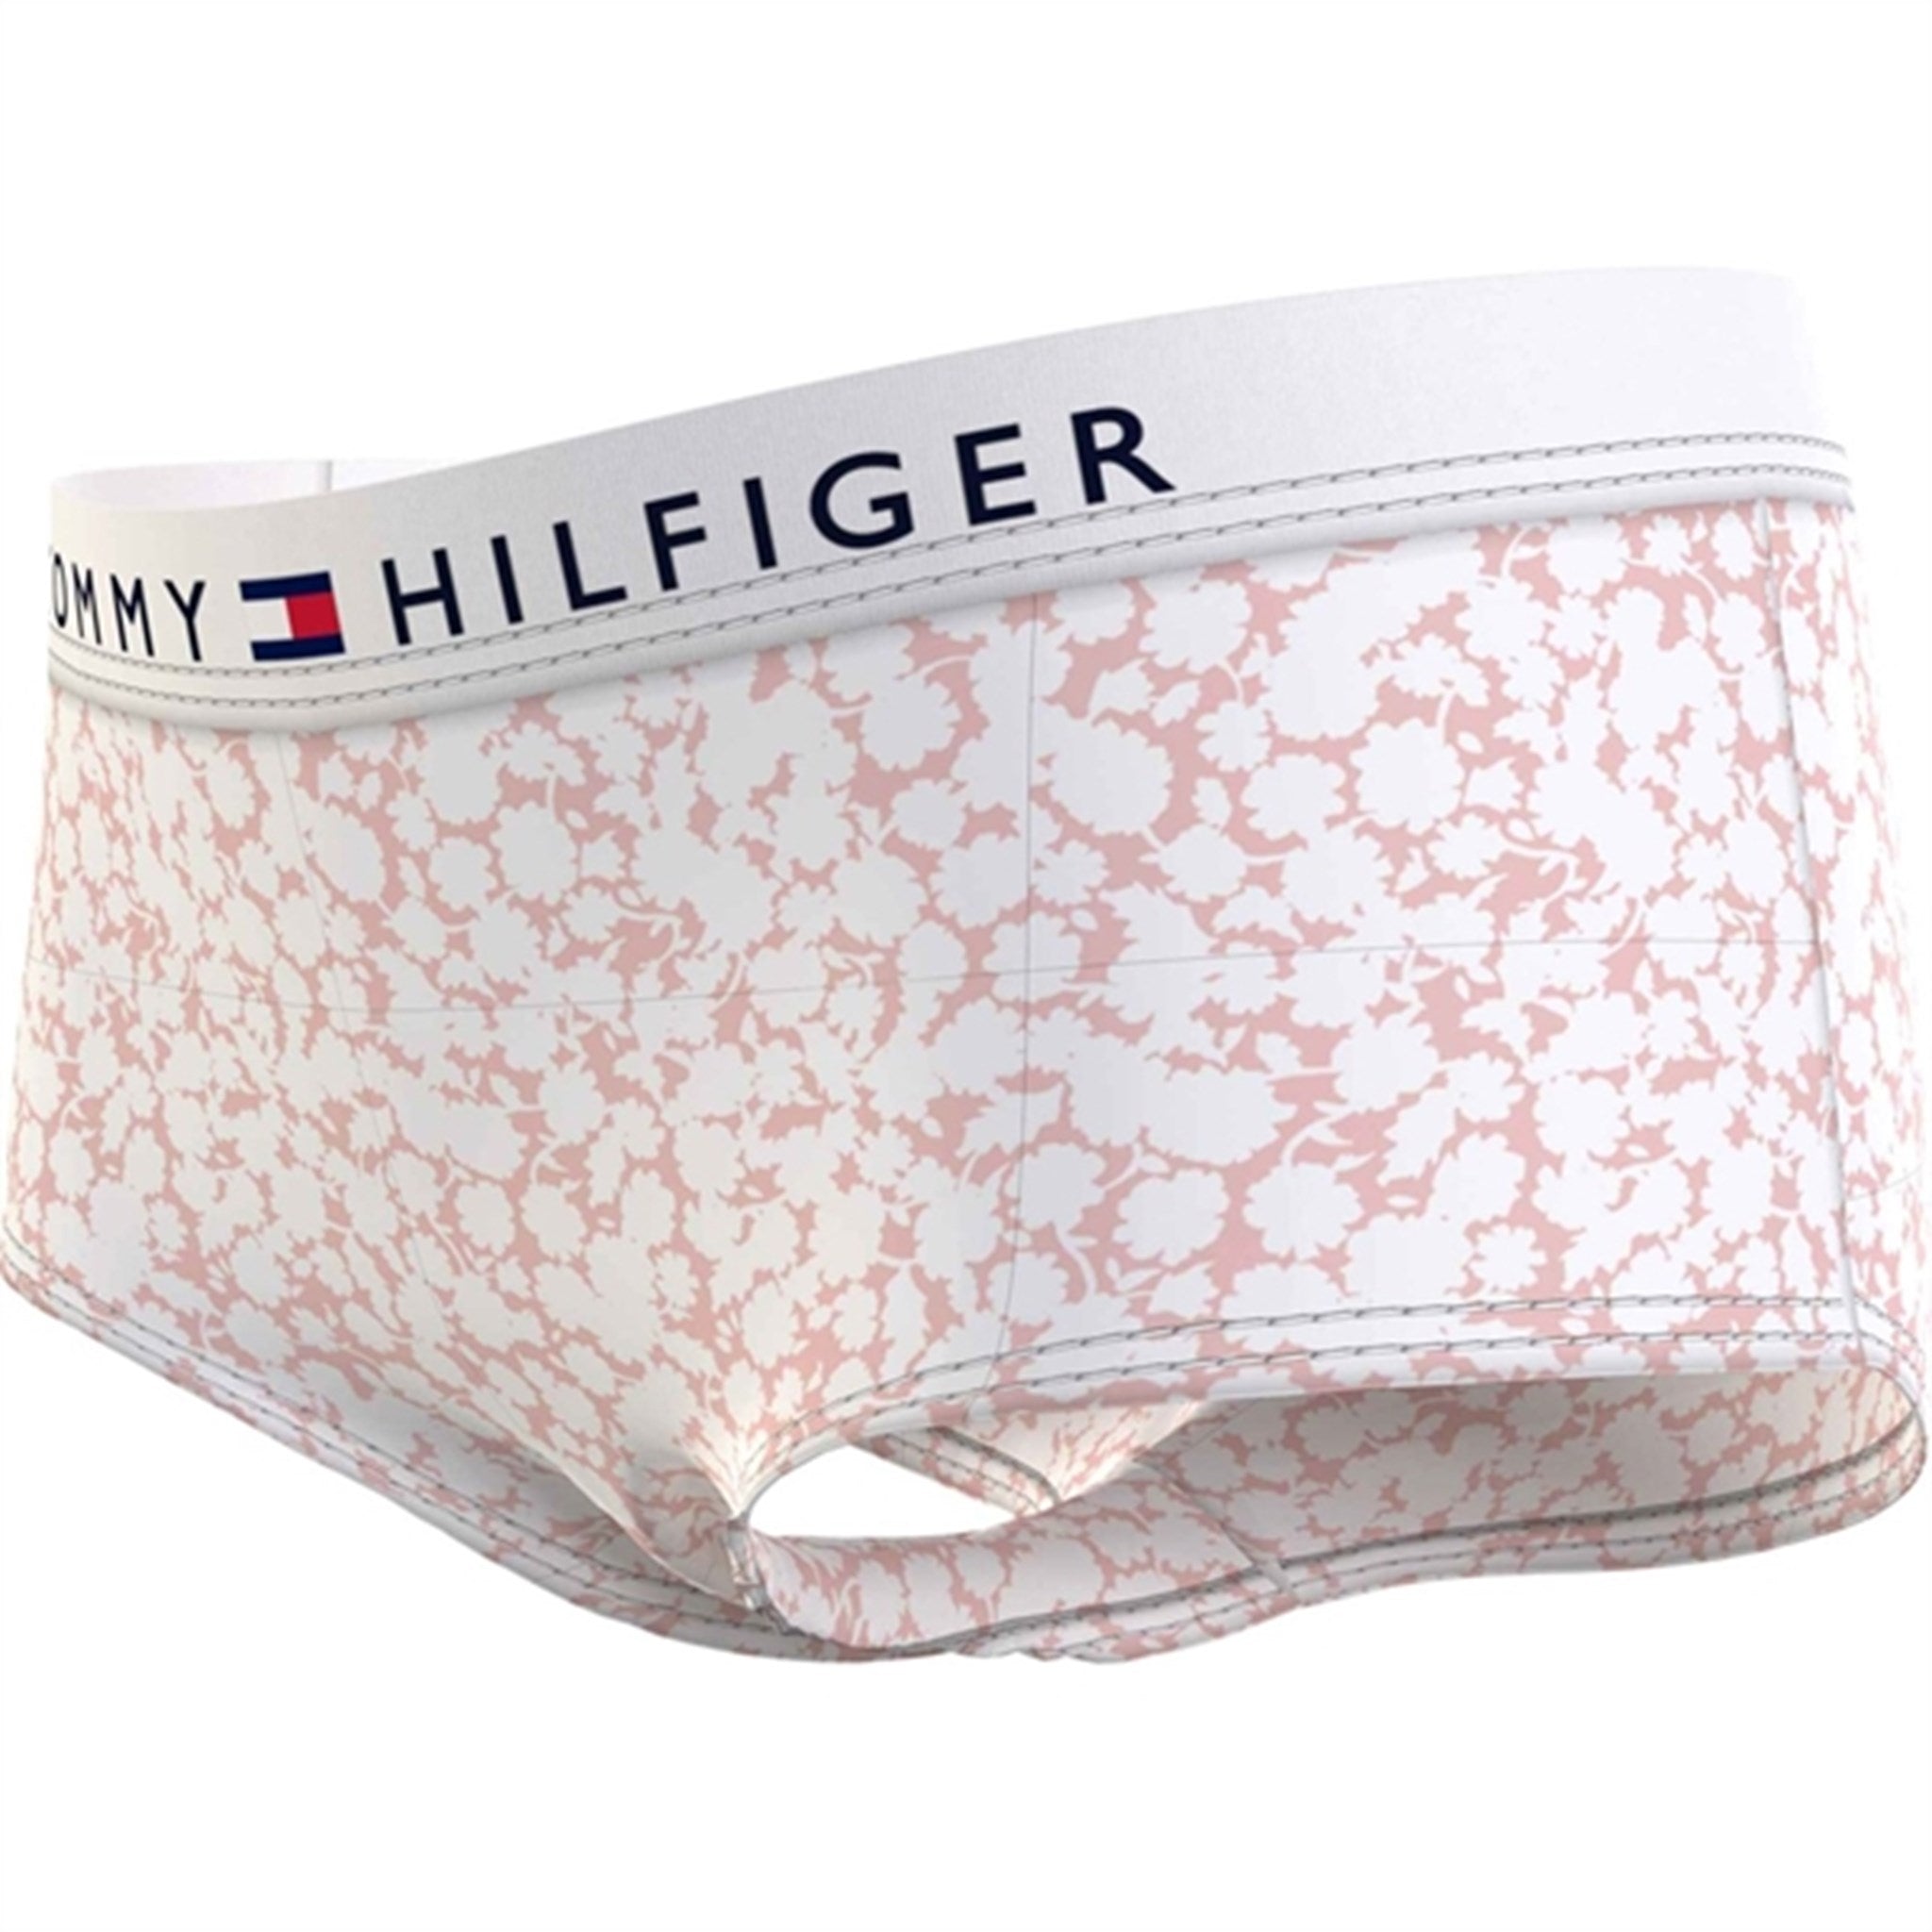 Tommy Hilfiger Briefs 2-Pack Printed Floral/Teaberry Blossom 3